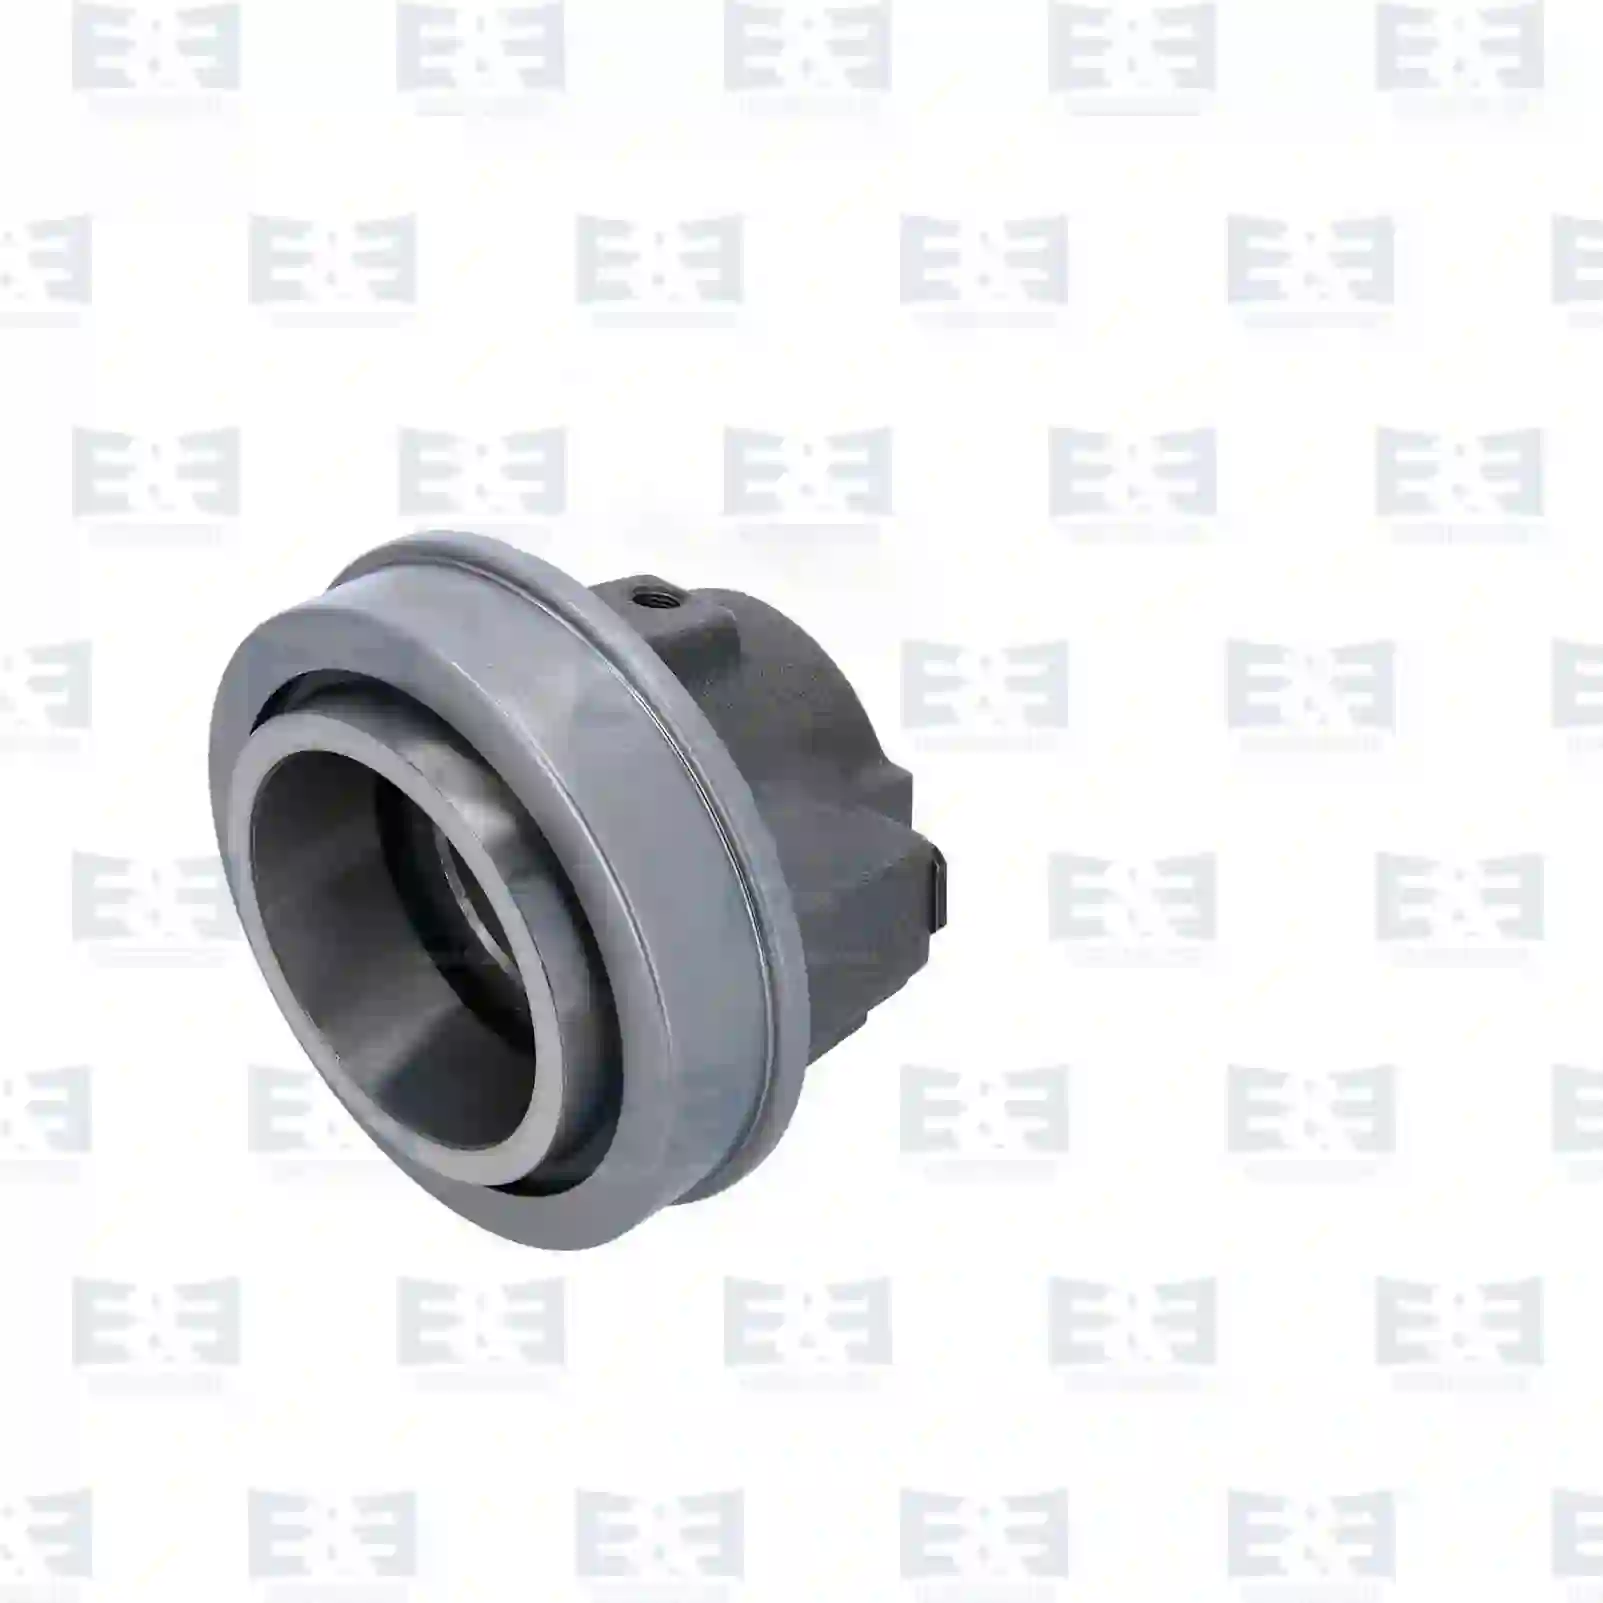  Release bearing || E&E Truck Spare Parts | Truck Spare Parts, Auotomotive Spare Parts